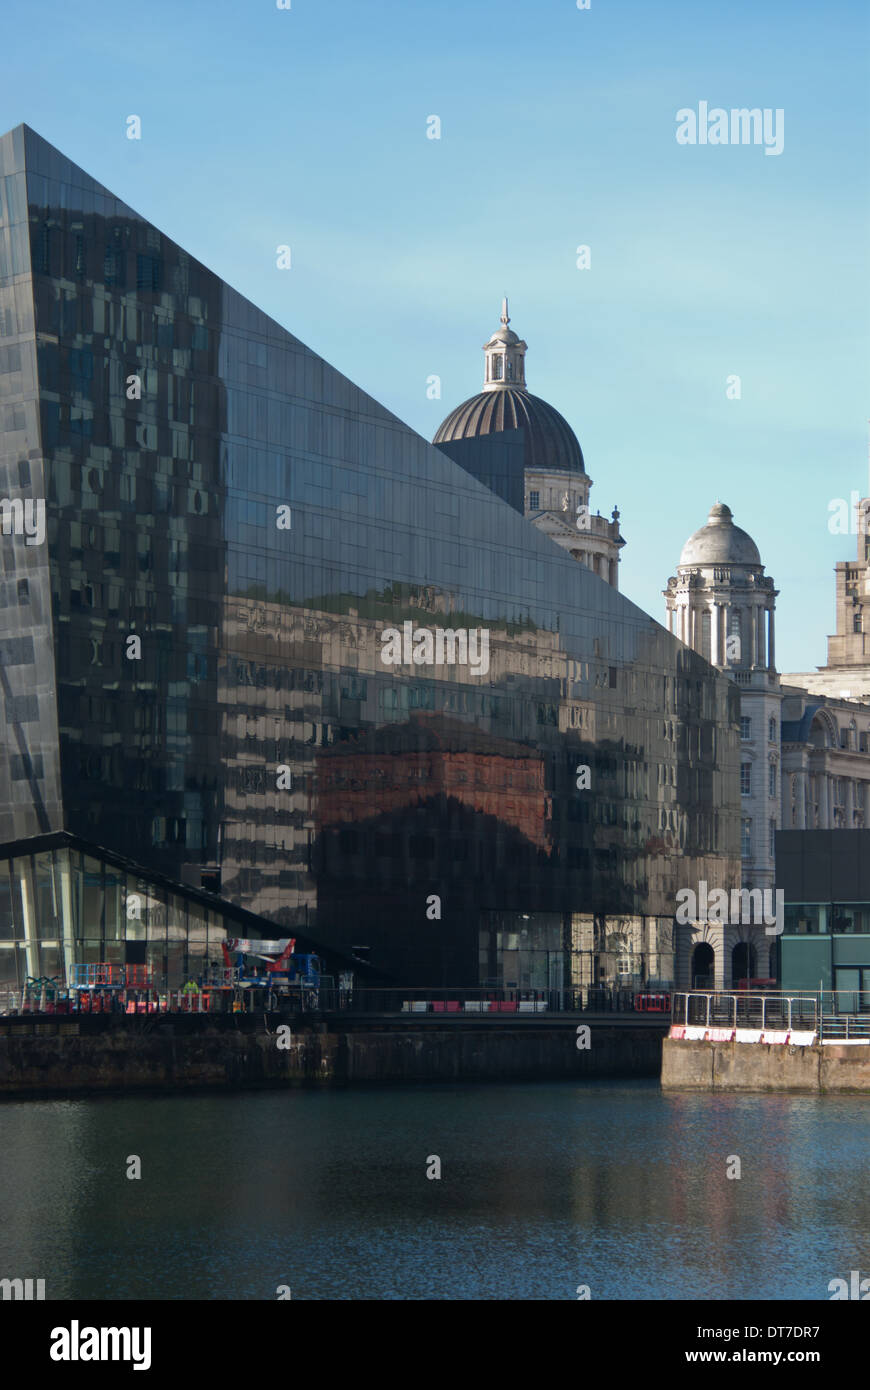 The Museum of Liverpool reflections. Stock Photo